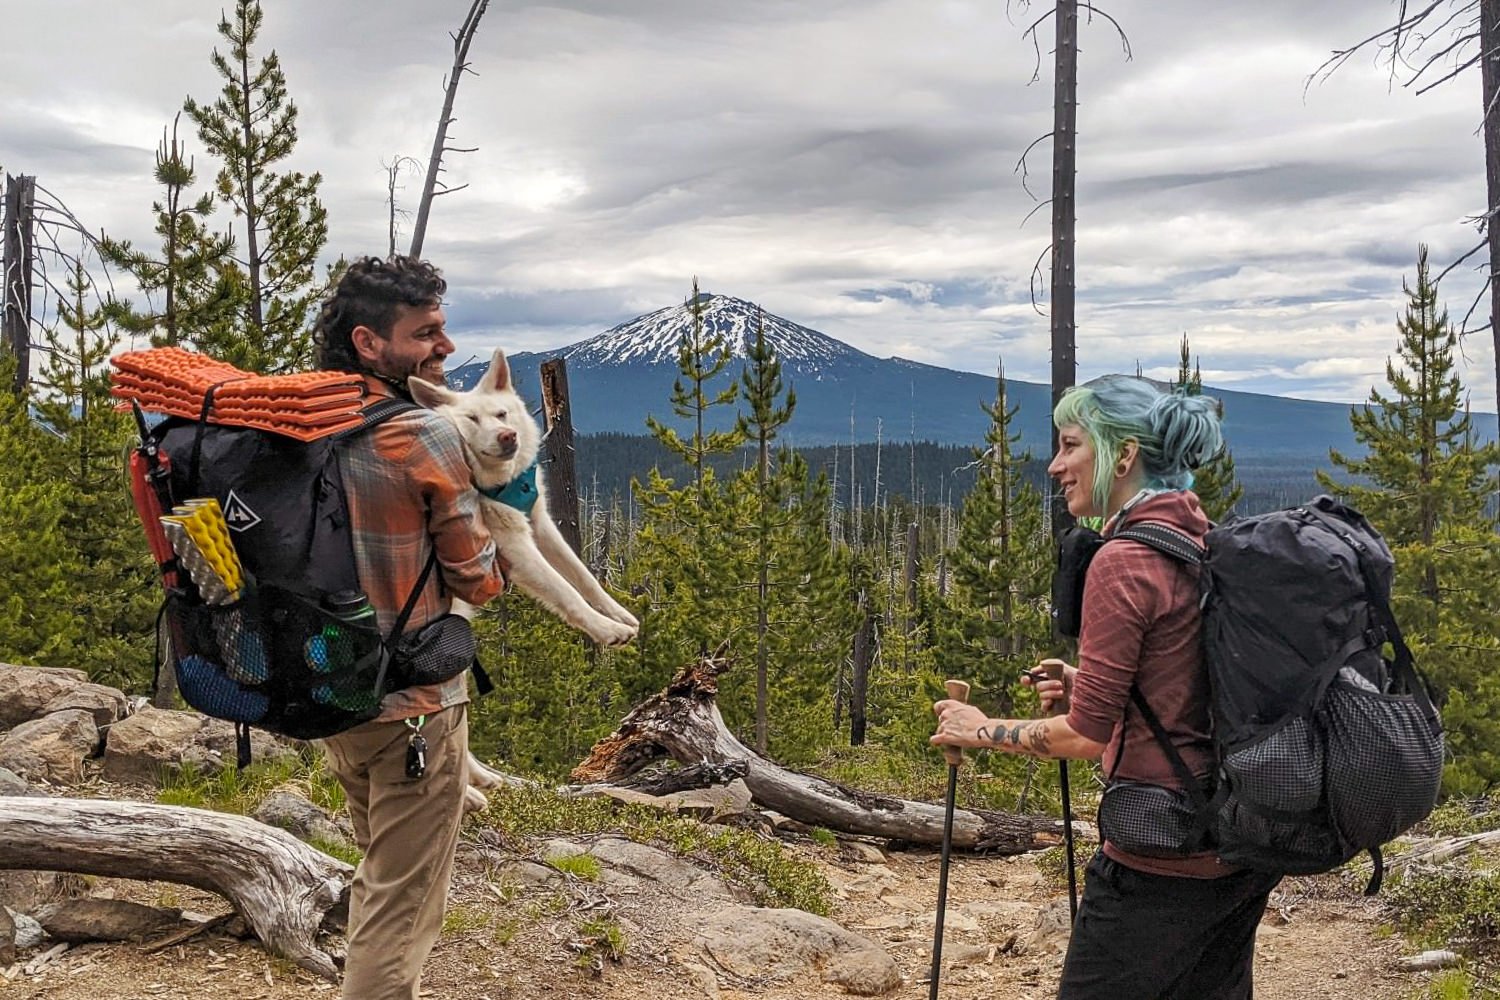 A backpacker holding a dog in front of Mt. Bachelor;